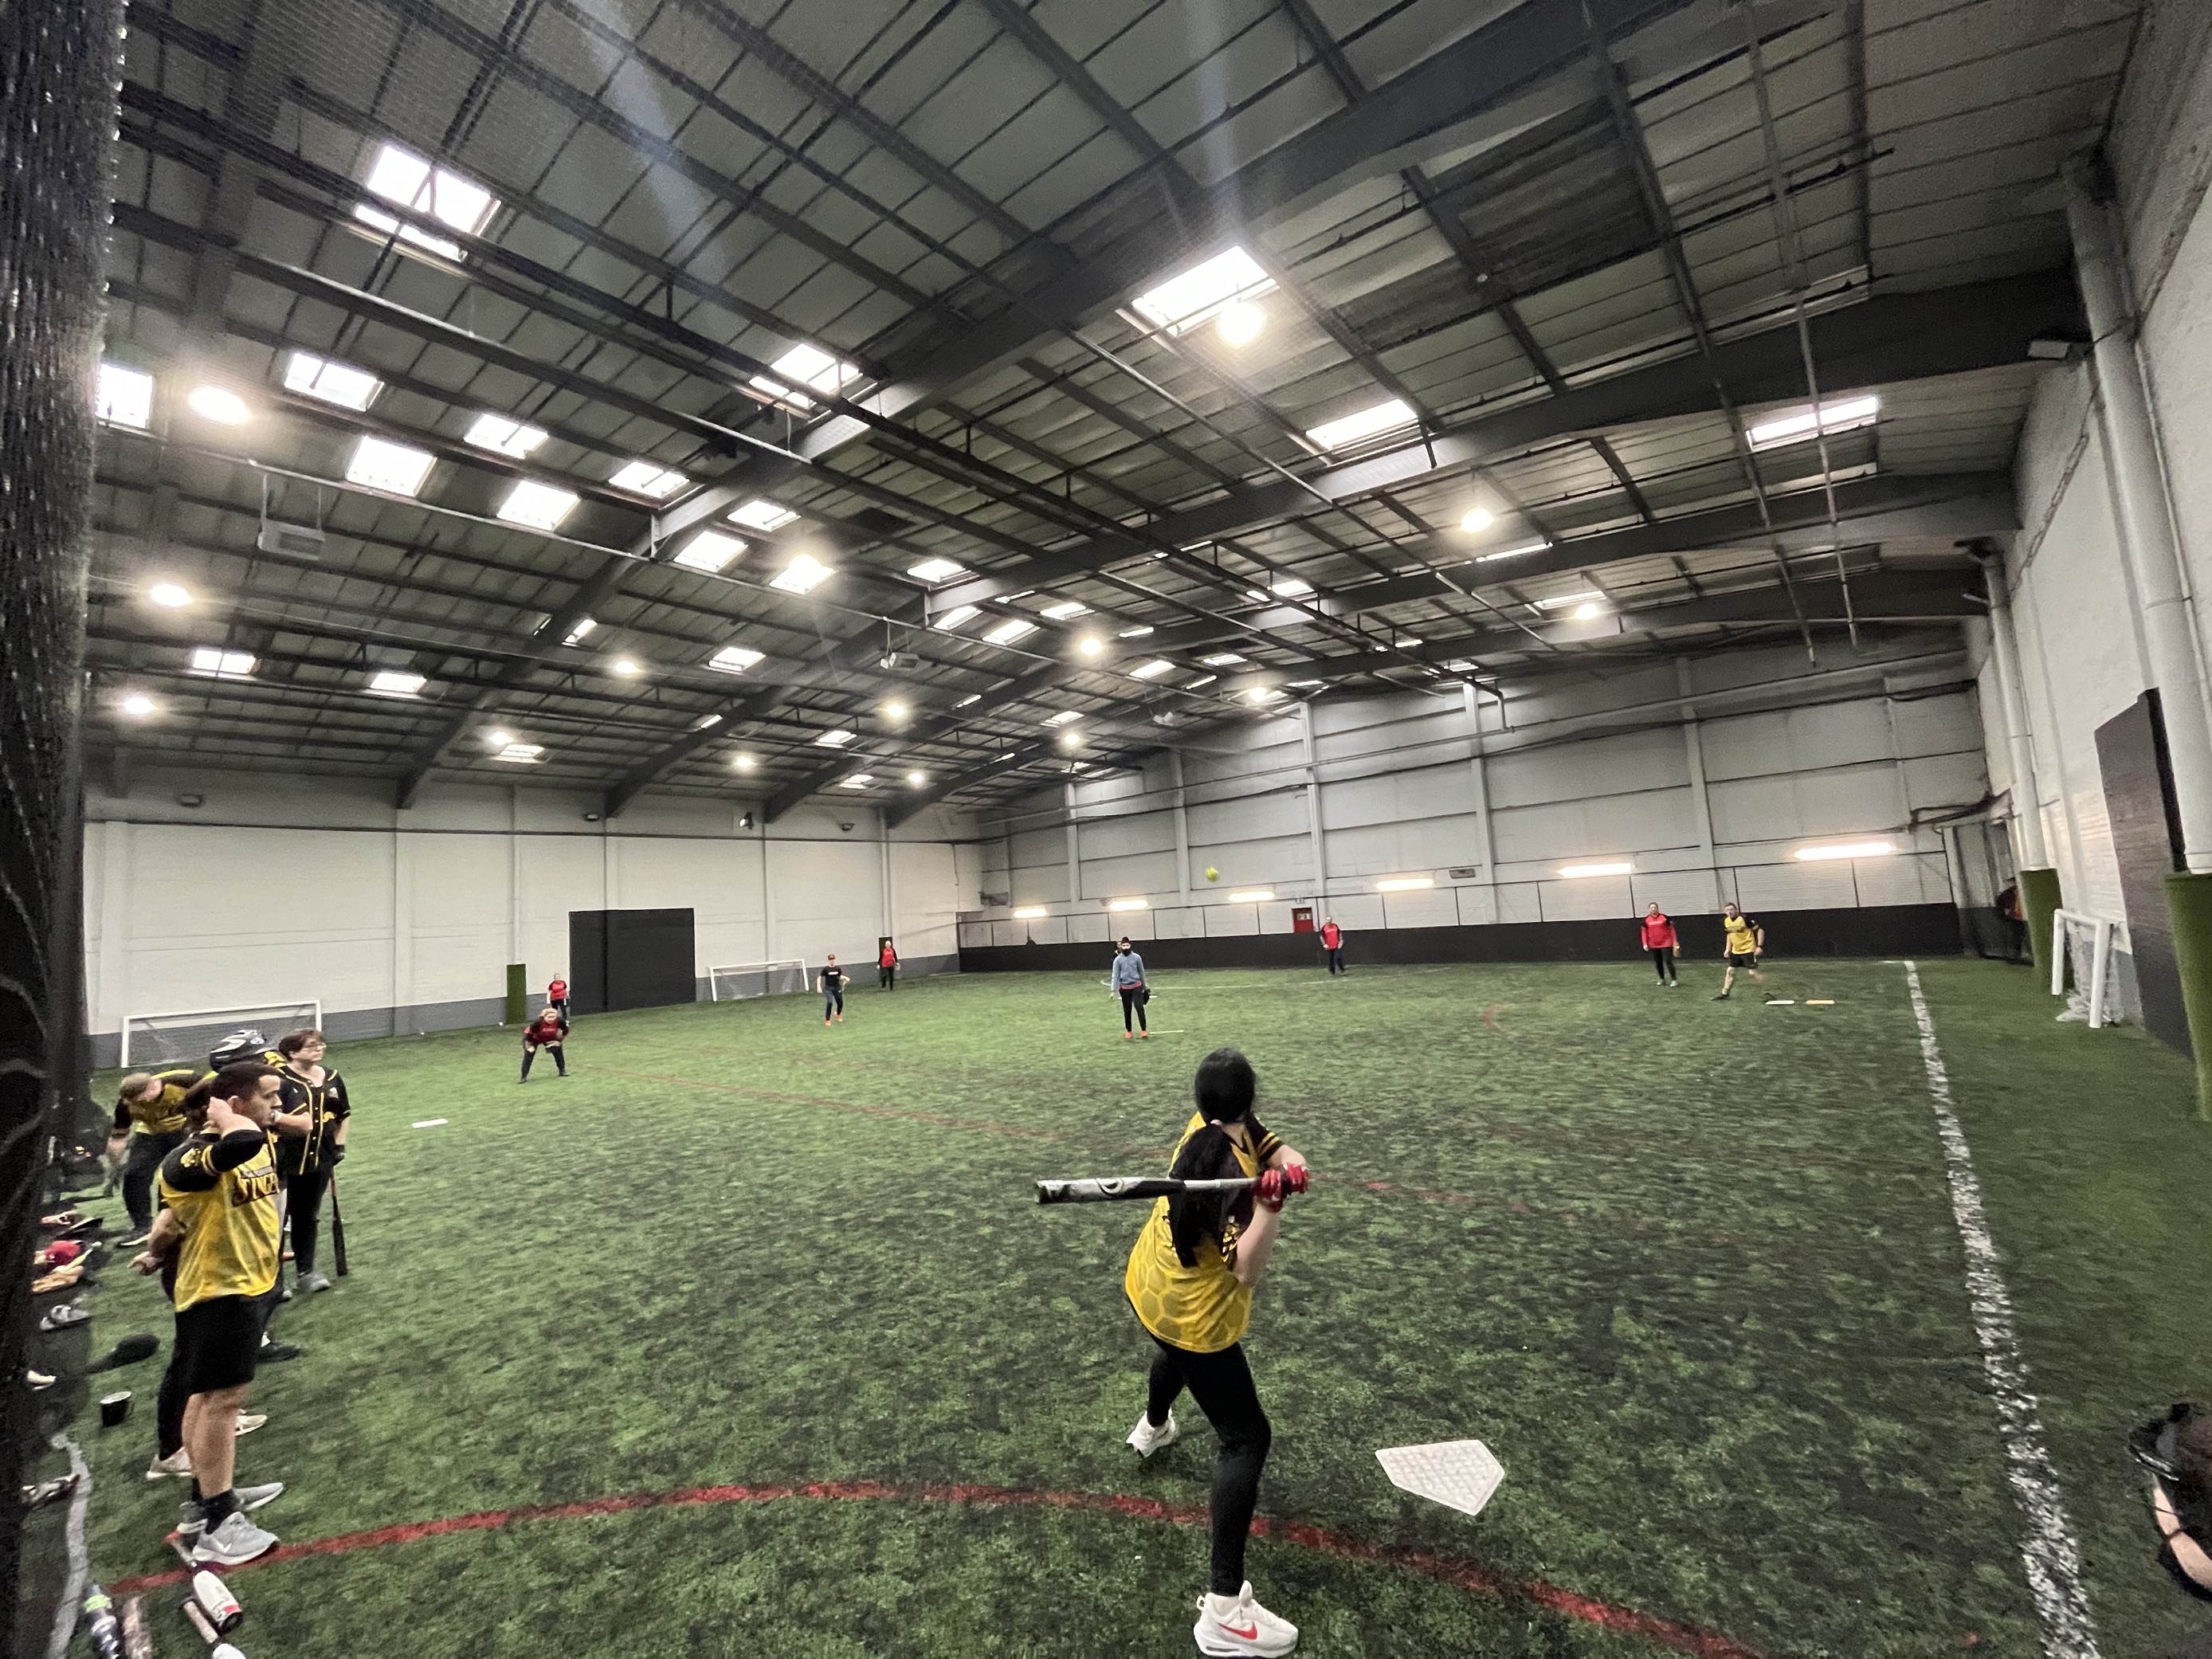 North West Series Softball being played at the Soccer Factory in Rochedale